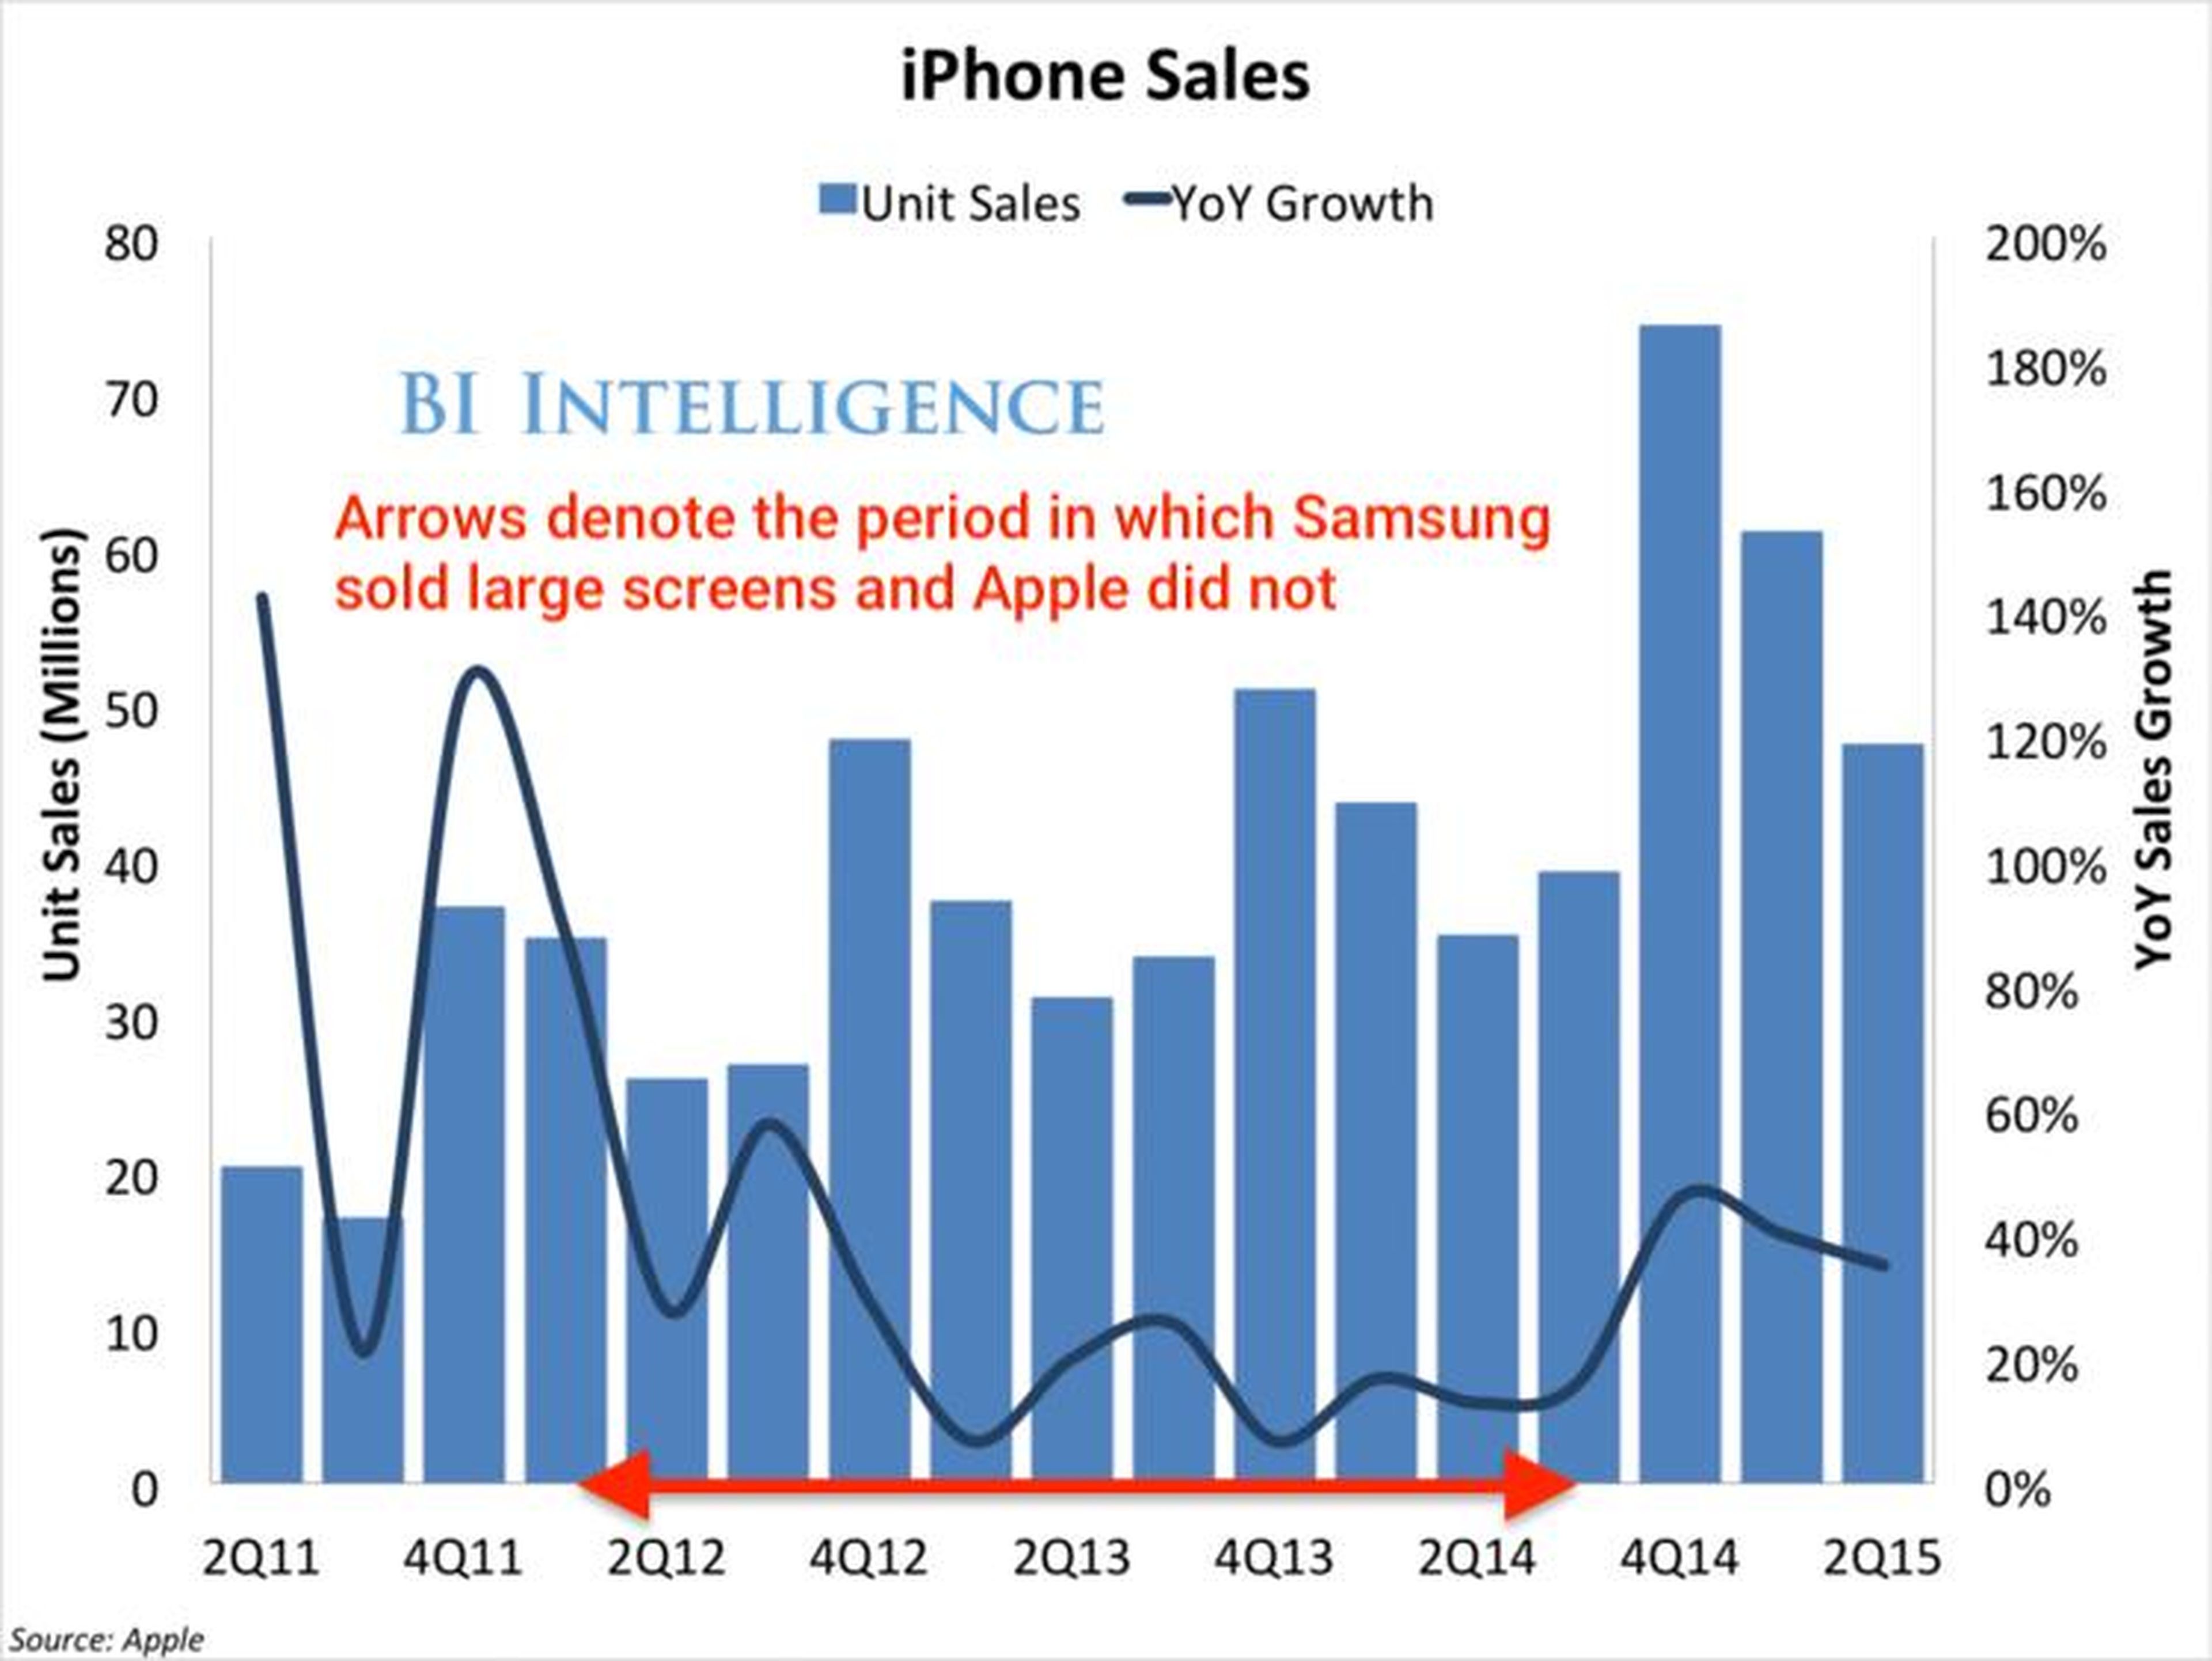 iPhone sales growth went through a trough when Apple had only small-screen models and Samsung had large ones.